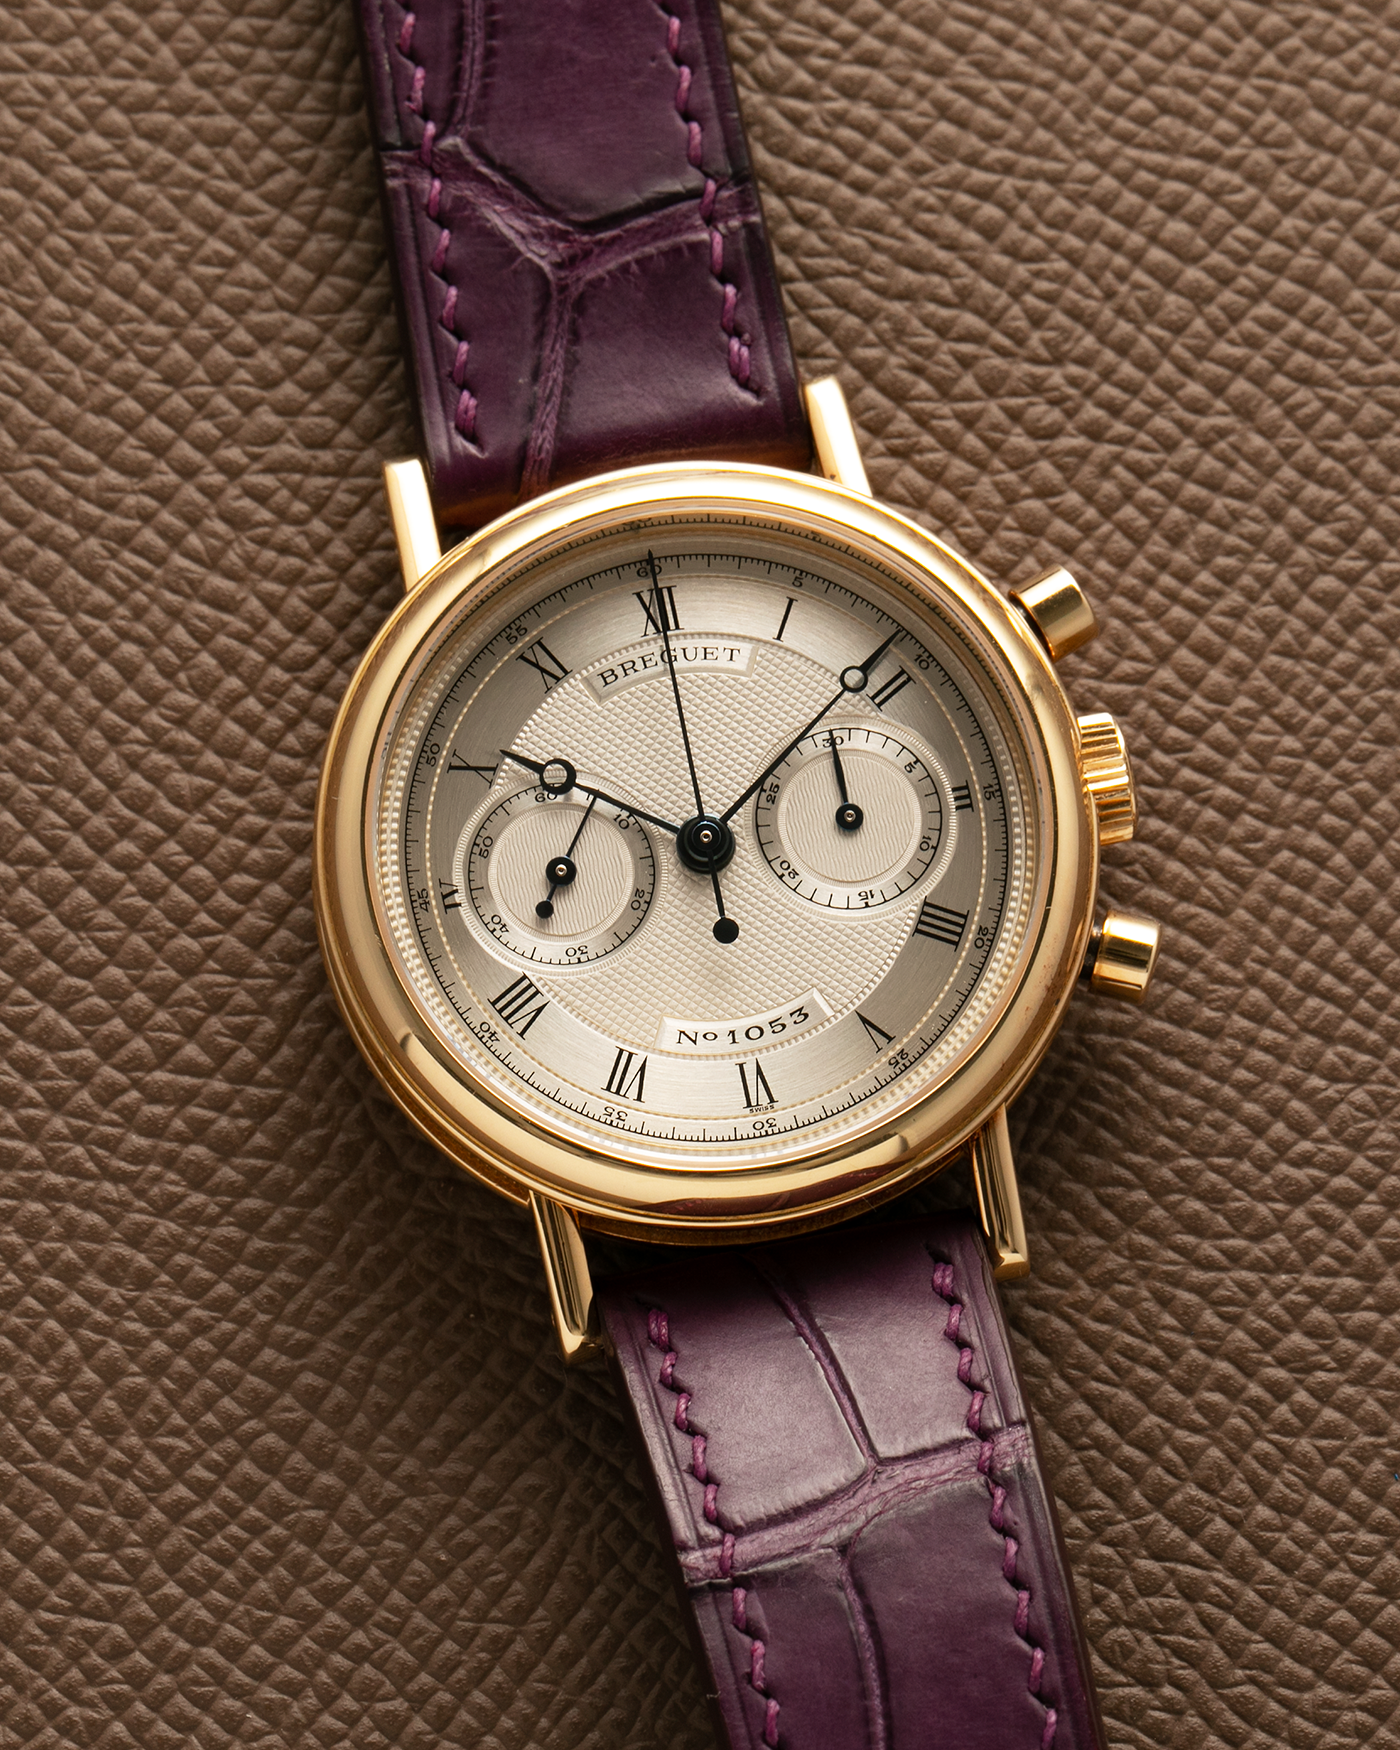 Brand: Breguet Year: 1990’s Model: Classique Chronograph Reference Number: 3237 Material: 18-carat Yellow Gold Movement: Lemania Cal. 2310, Manual-Winding Case Diameter: 36mm Lug Width: 18mm Strap: Unbranded Dark Purple Alligator Leather Strap with Signed 18-carat Yellow Gold Breguet Tang Buckle